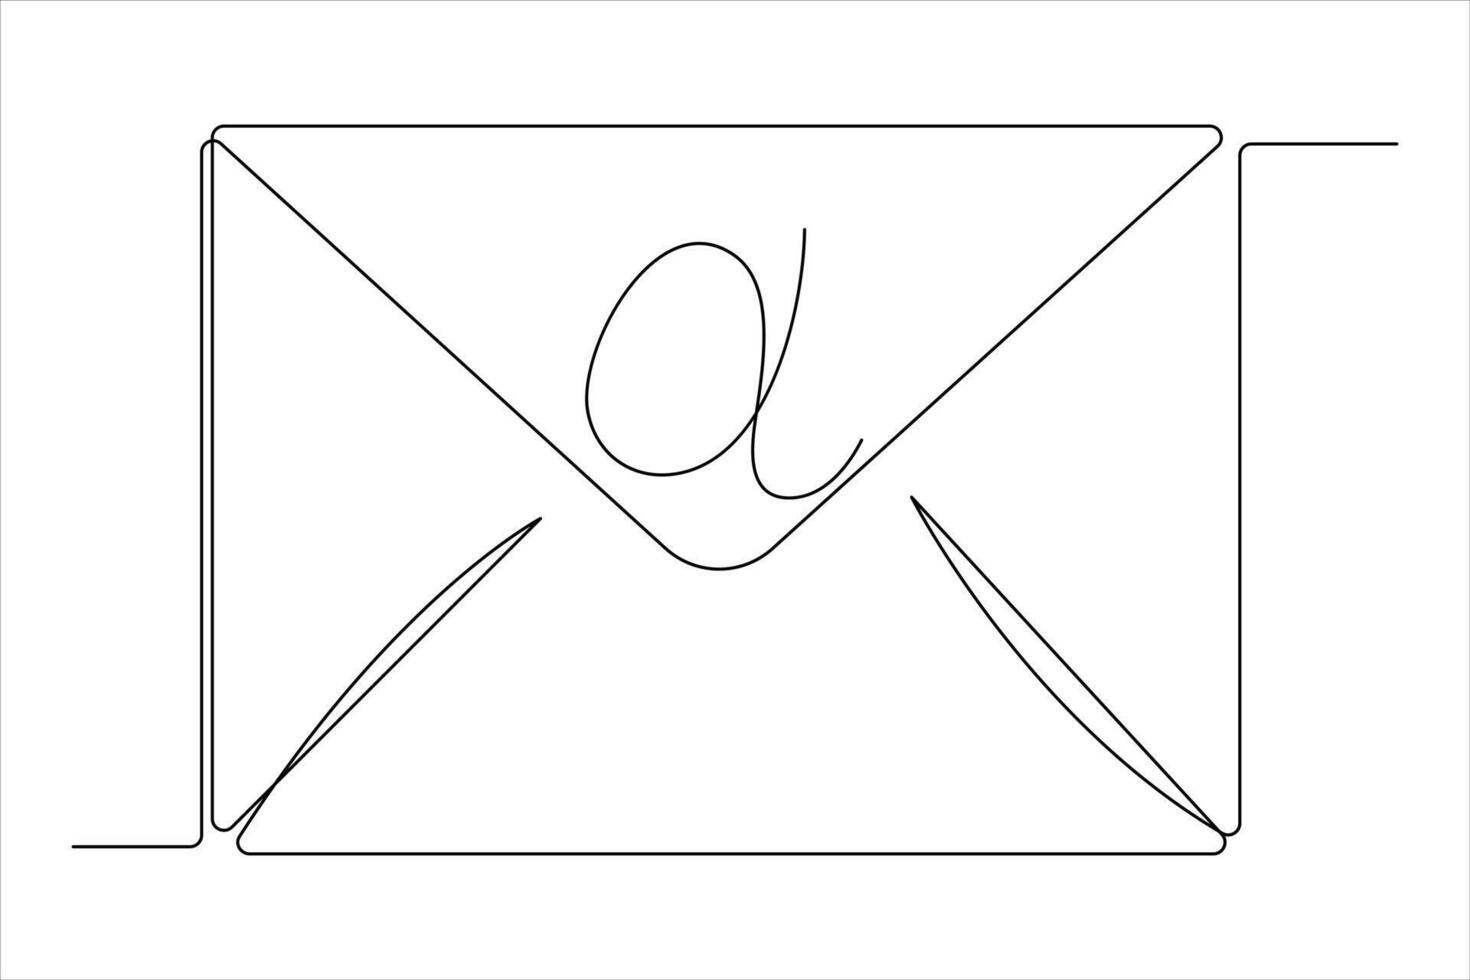 Continuous one line email outline hand drawn symbol art illustration vector